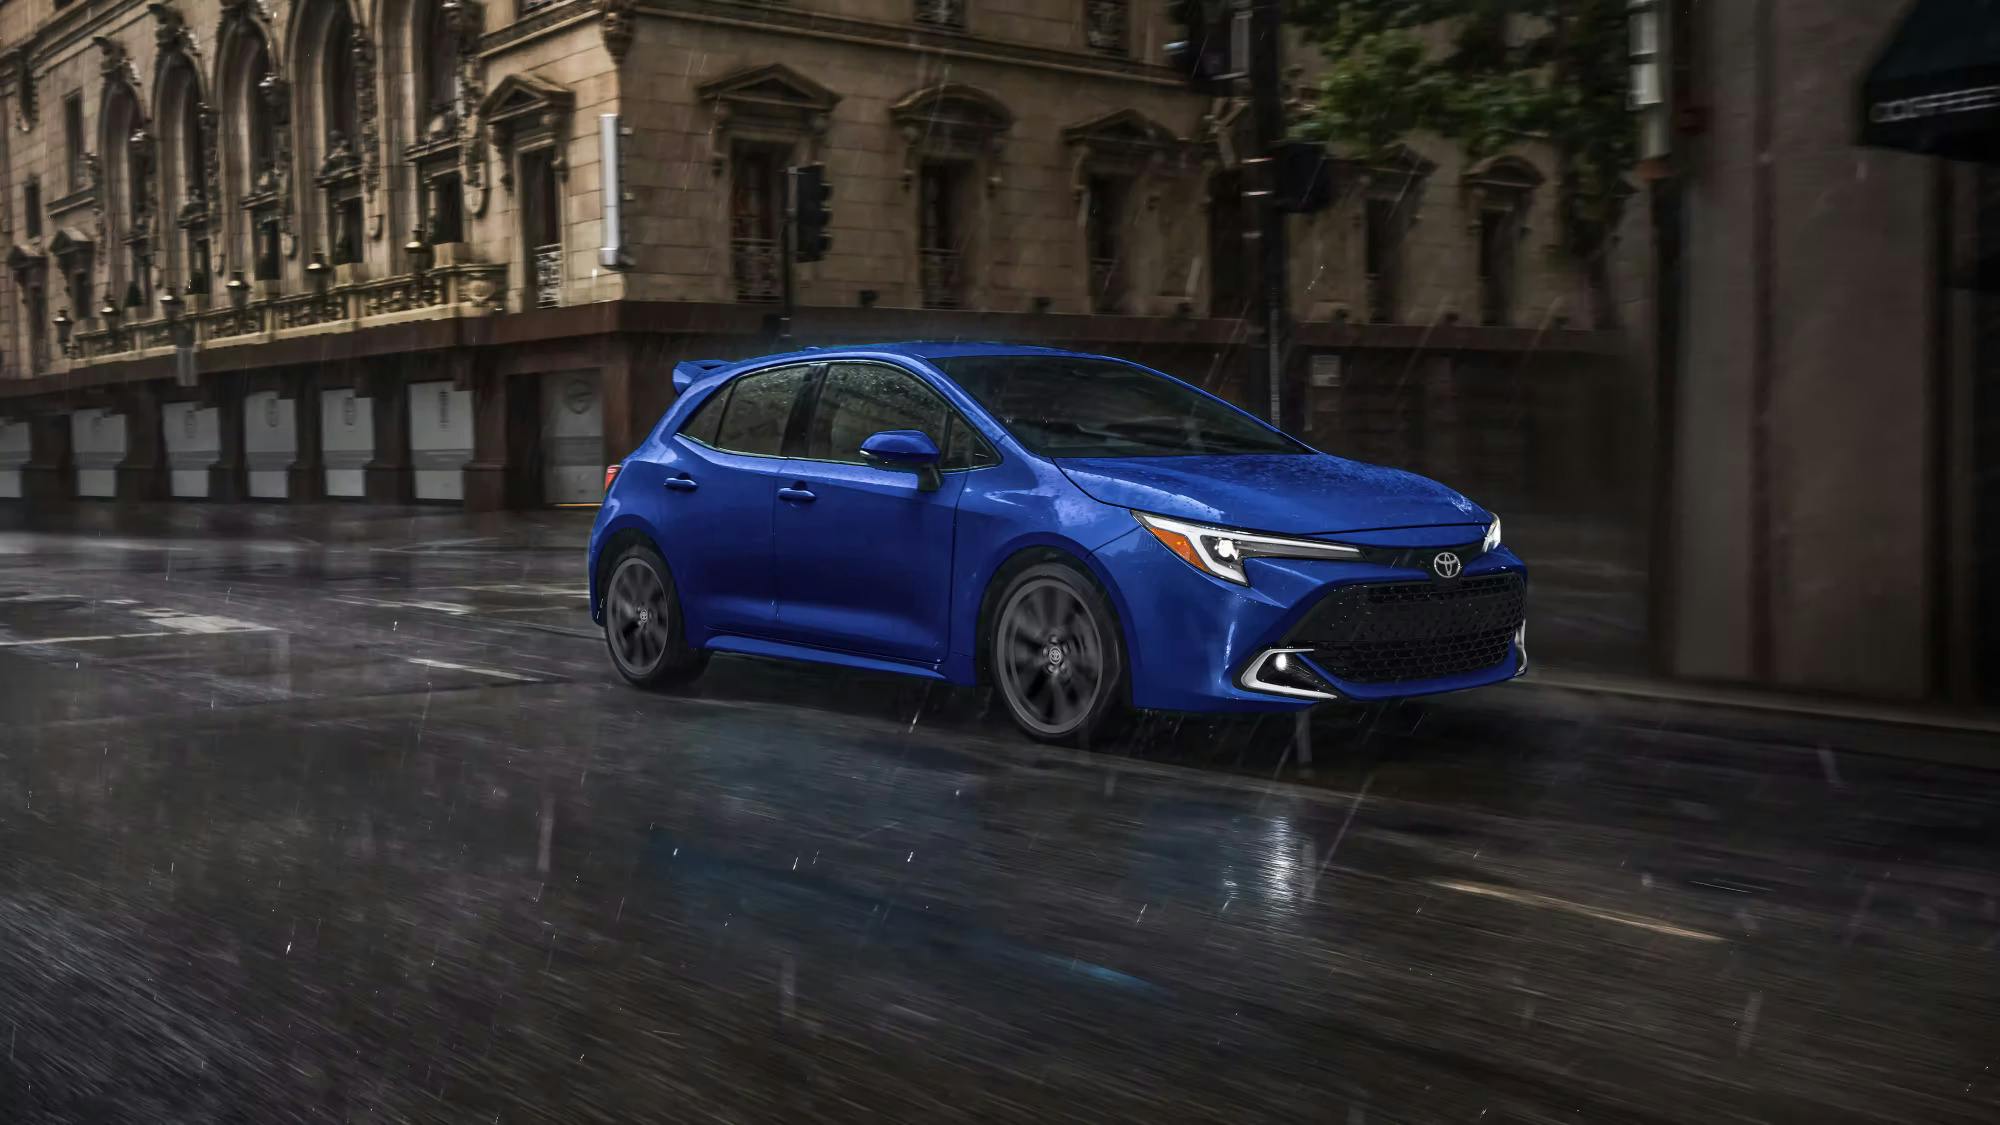 2023 Toyota Corolla Hatchback Dimensions and Space